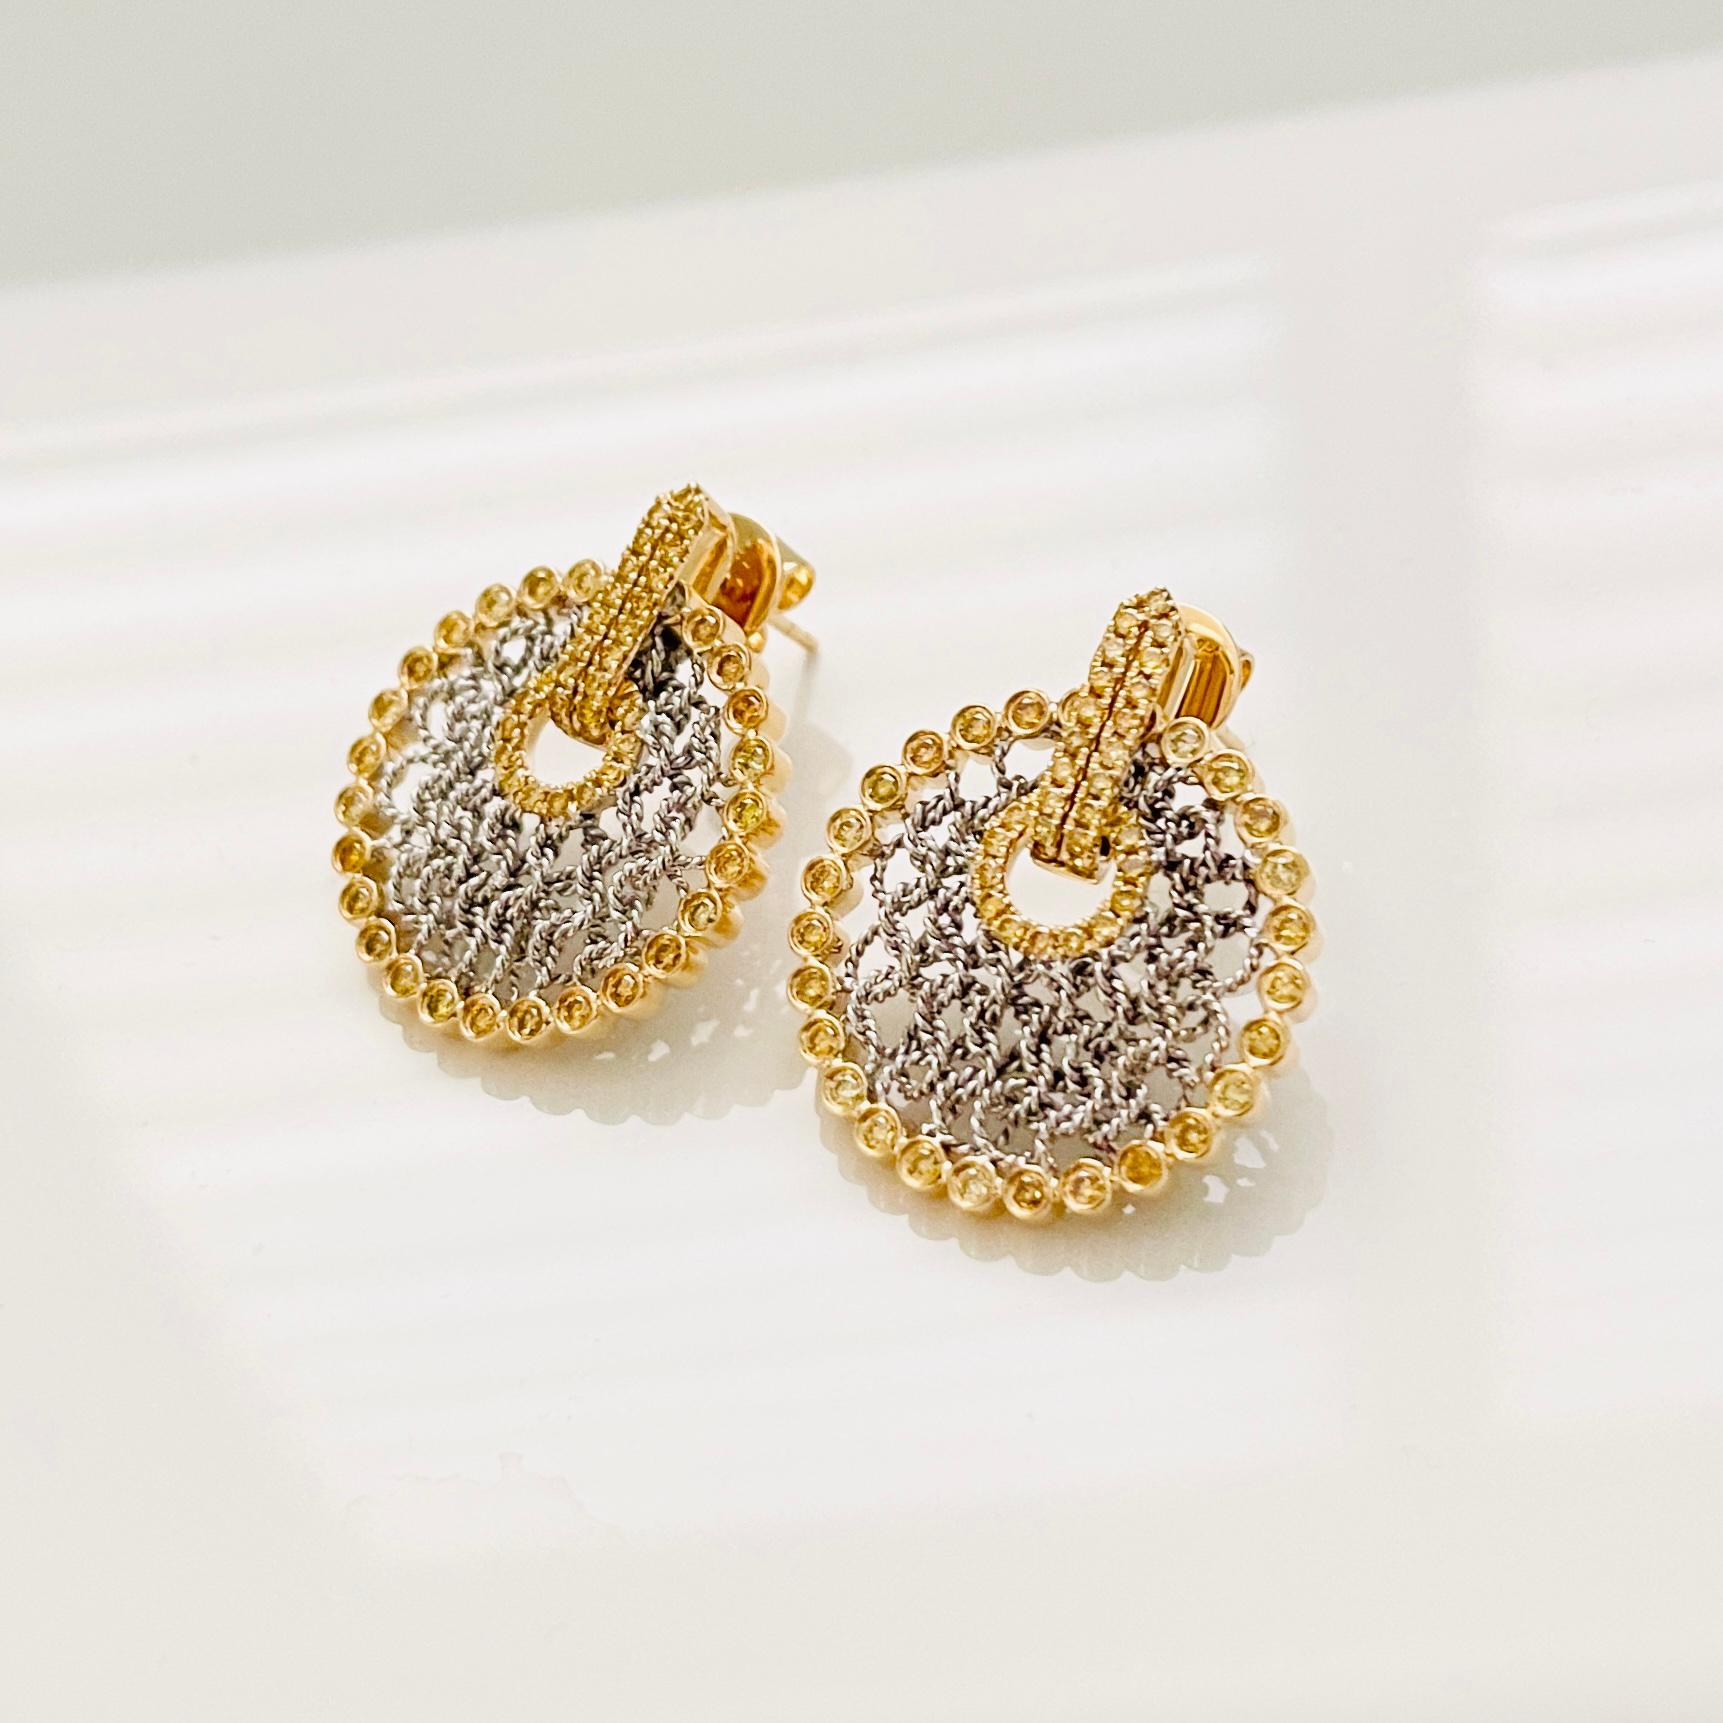 Vitolo 18 Karat Gold Handmade Mesh Earrings with Yellow Diamonds In New Condition For Sale In Los Angeles, CA